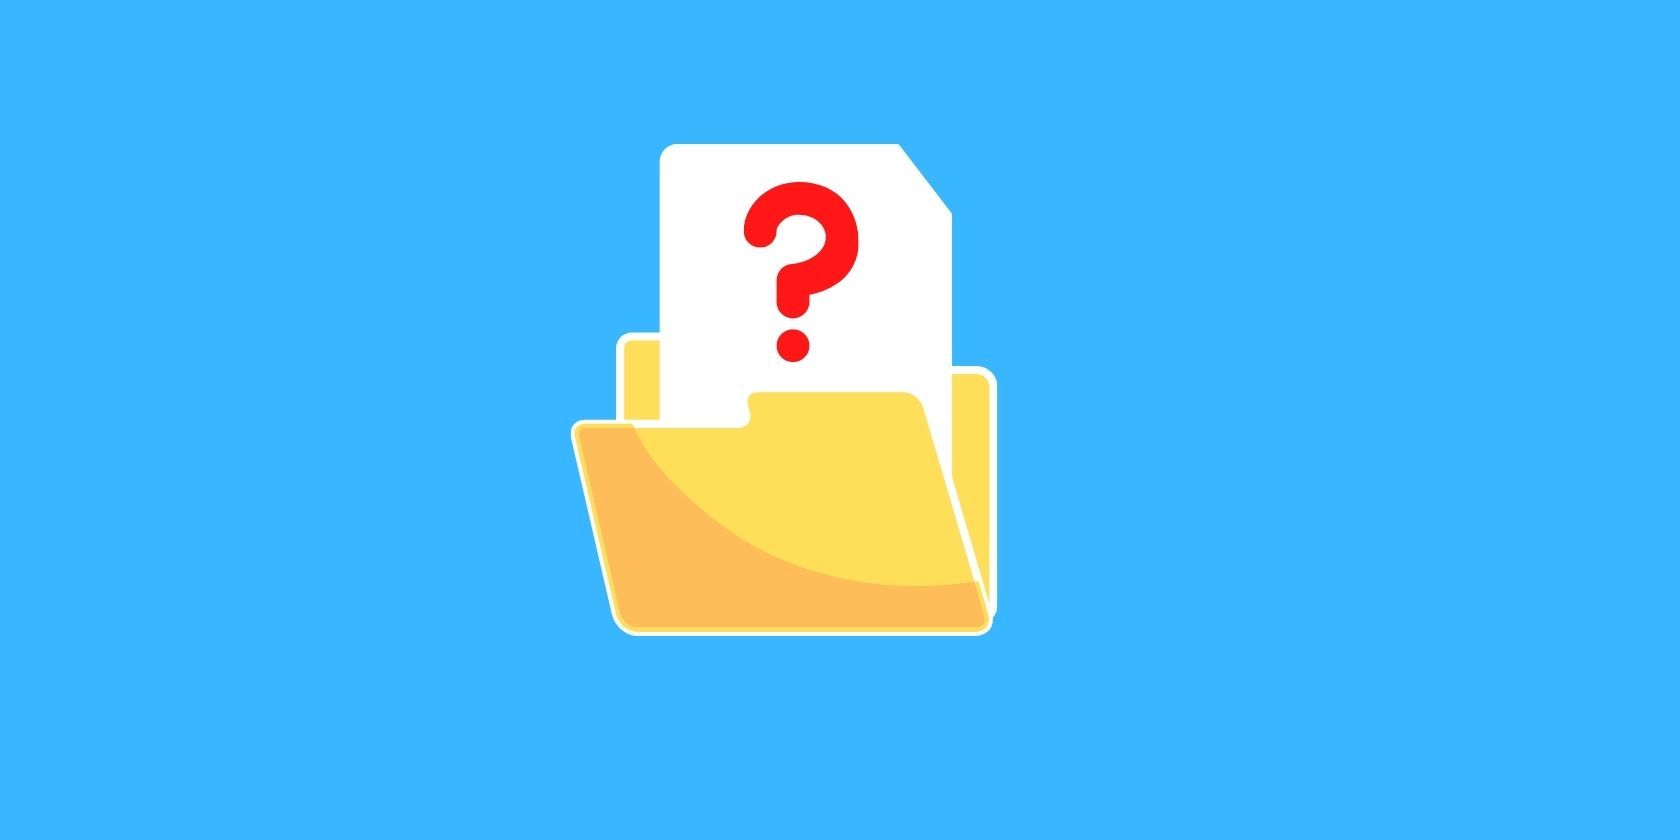 Folder and file icons with a question mark are seen on a blue background